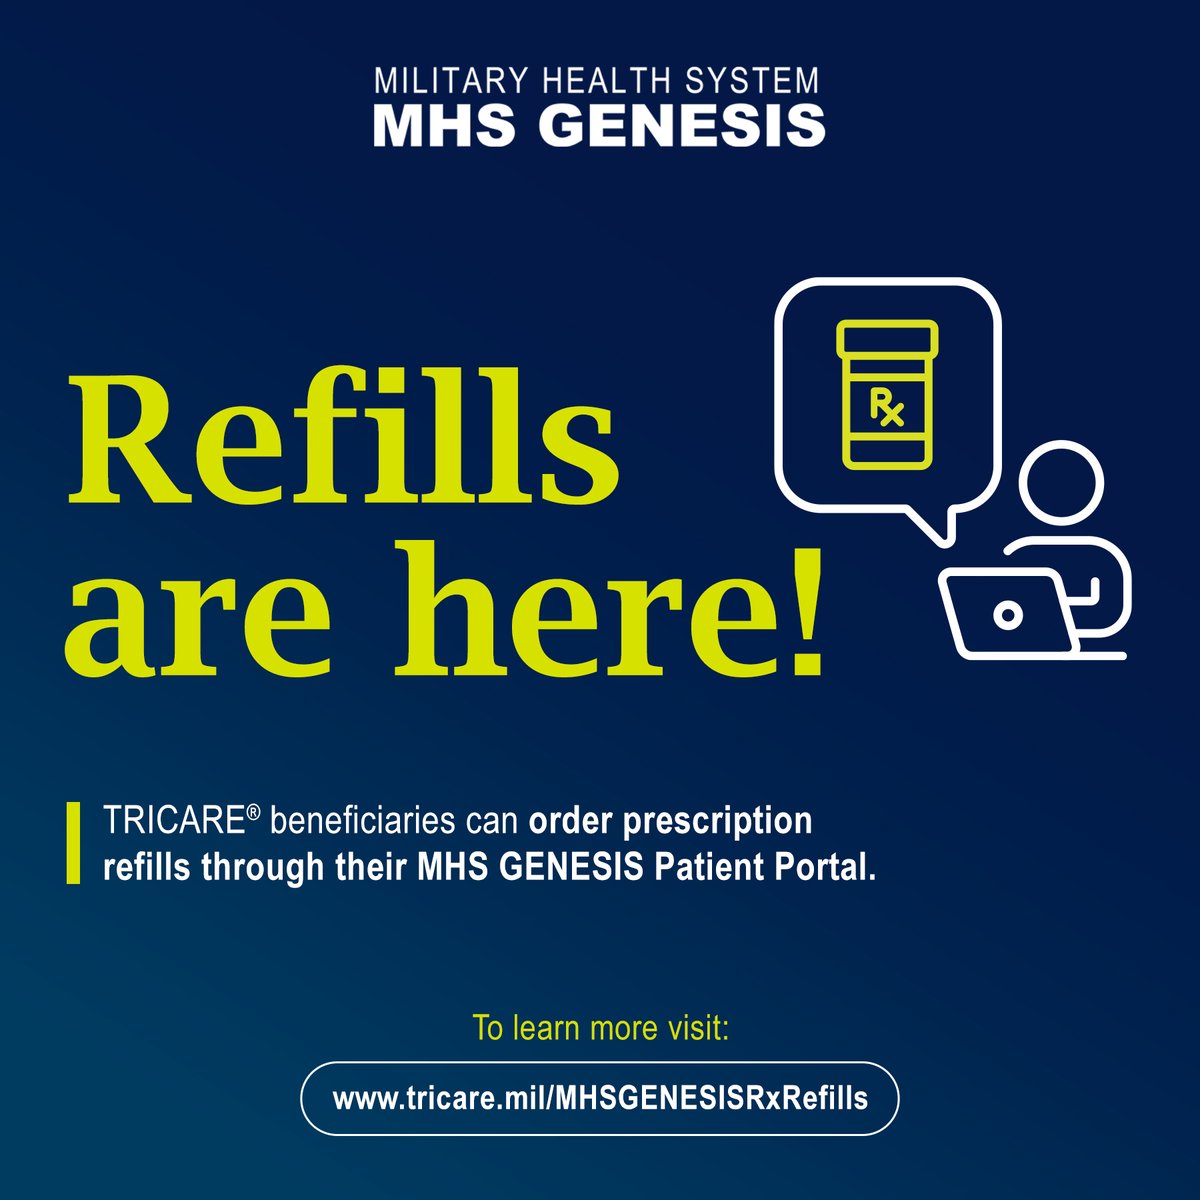 Need to refill a prescription? You can use the MHS GENESIS Patient Portal to refill prescriptions at your military pharmacy. Learn more about this new feature at: tricare.mil/MHSGENESISRxRe…